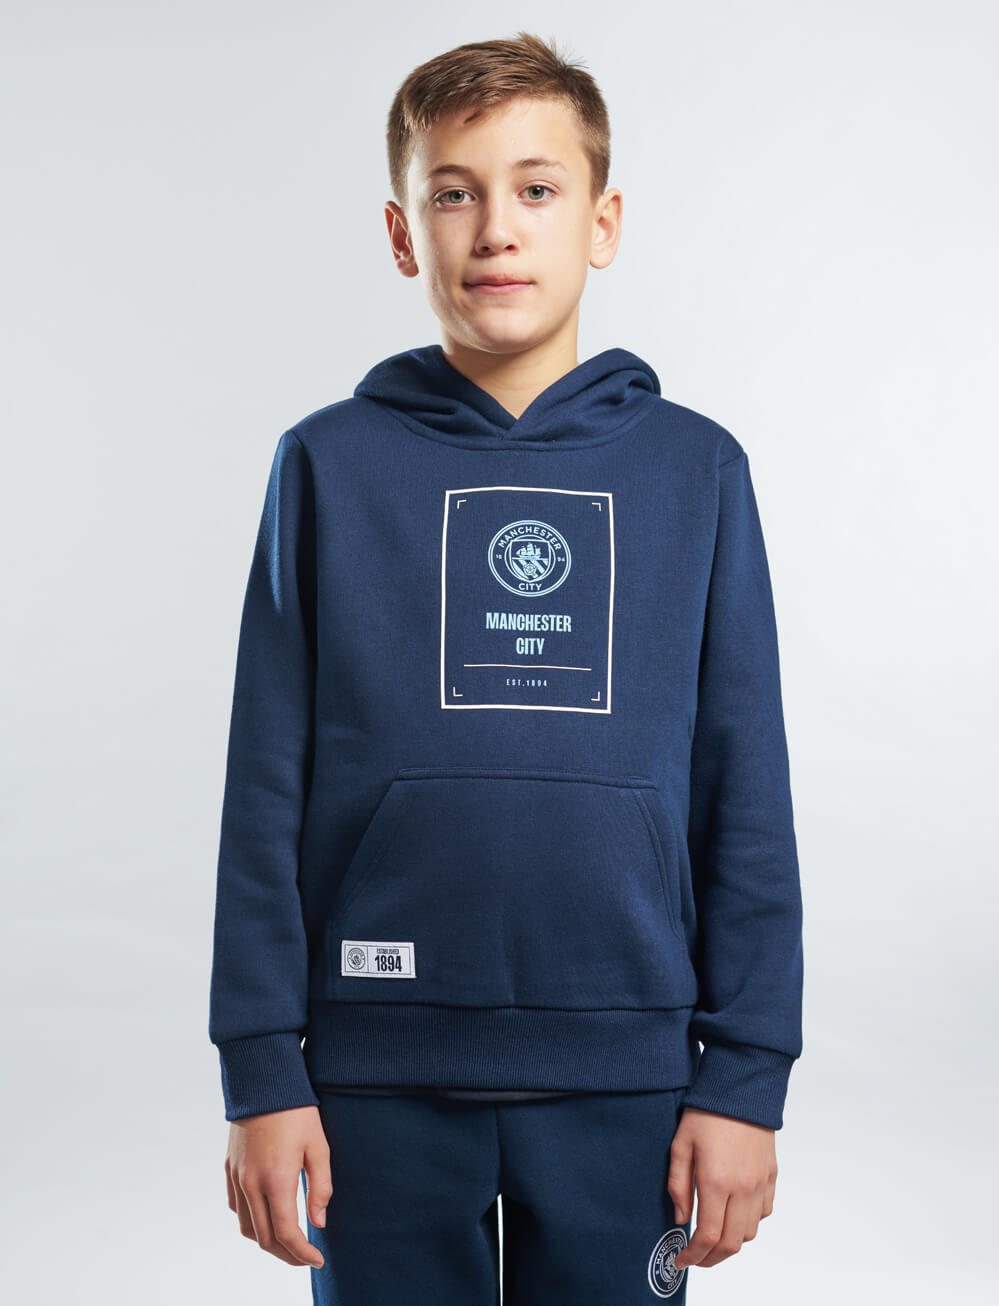 Official Manchester City Kids Crest Hoodie - Navy - The World Football Store